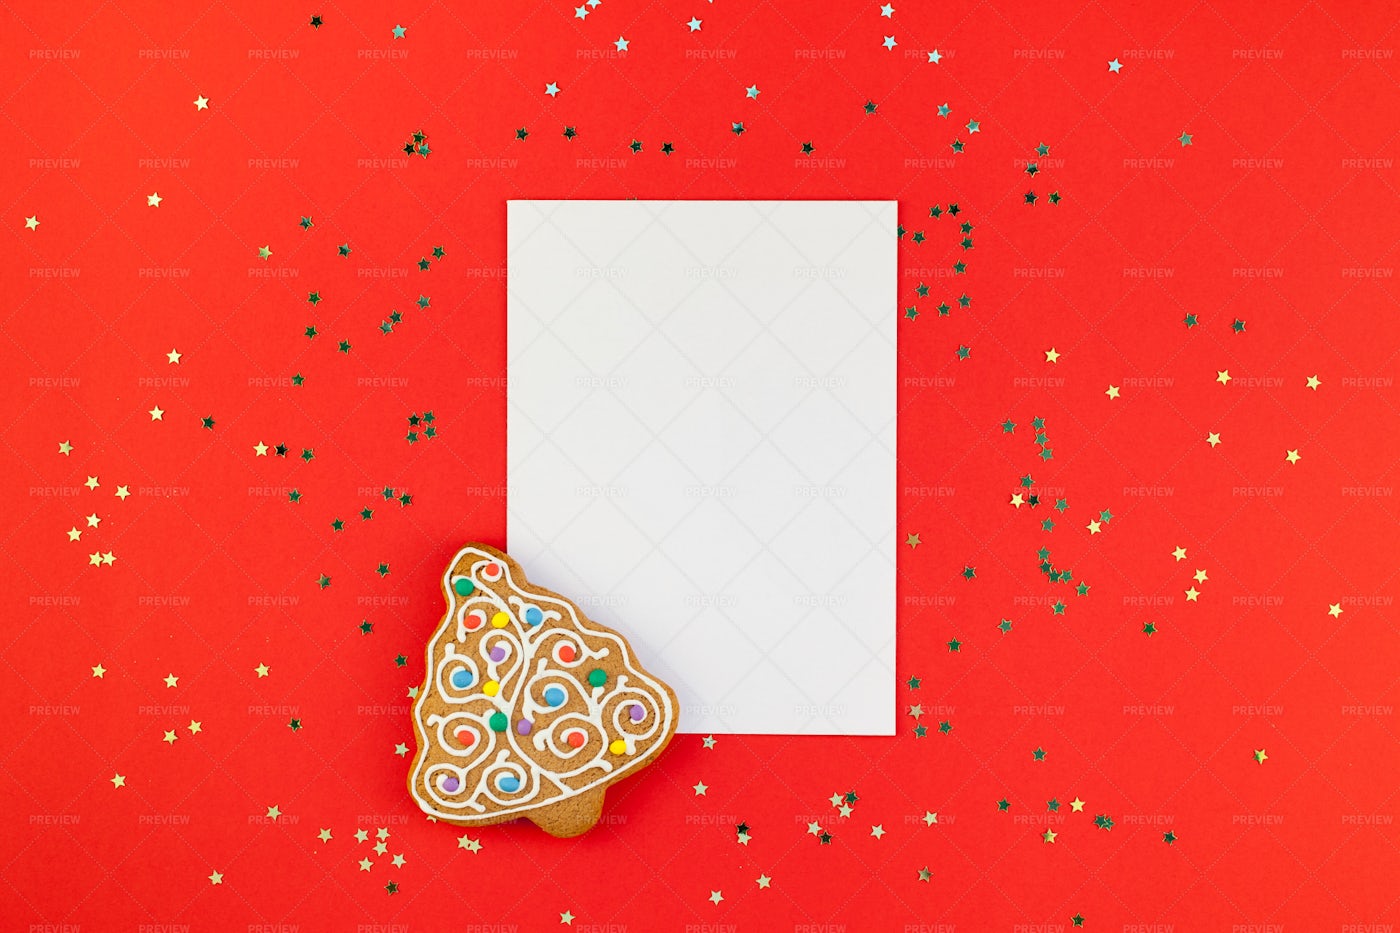 Letter And Gingerbread Cookie: Stock Photos